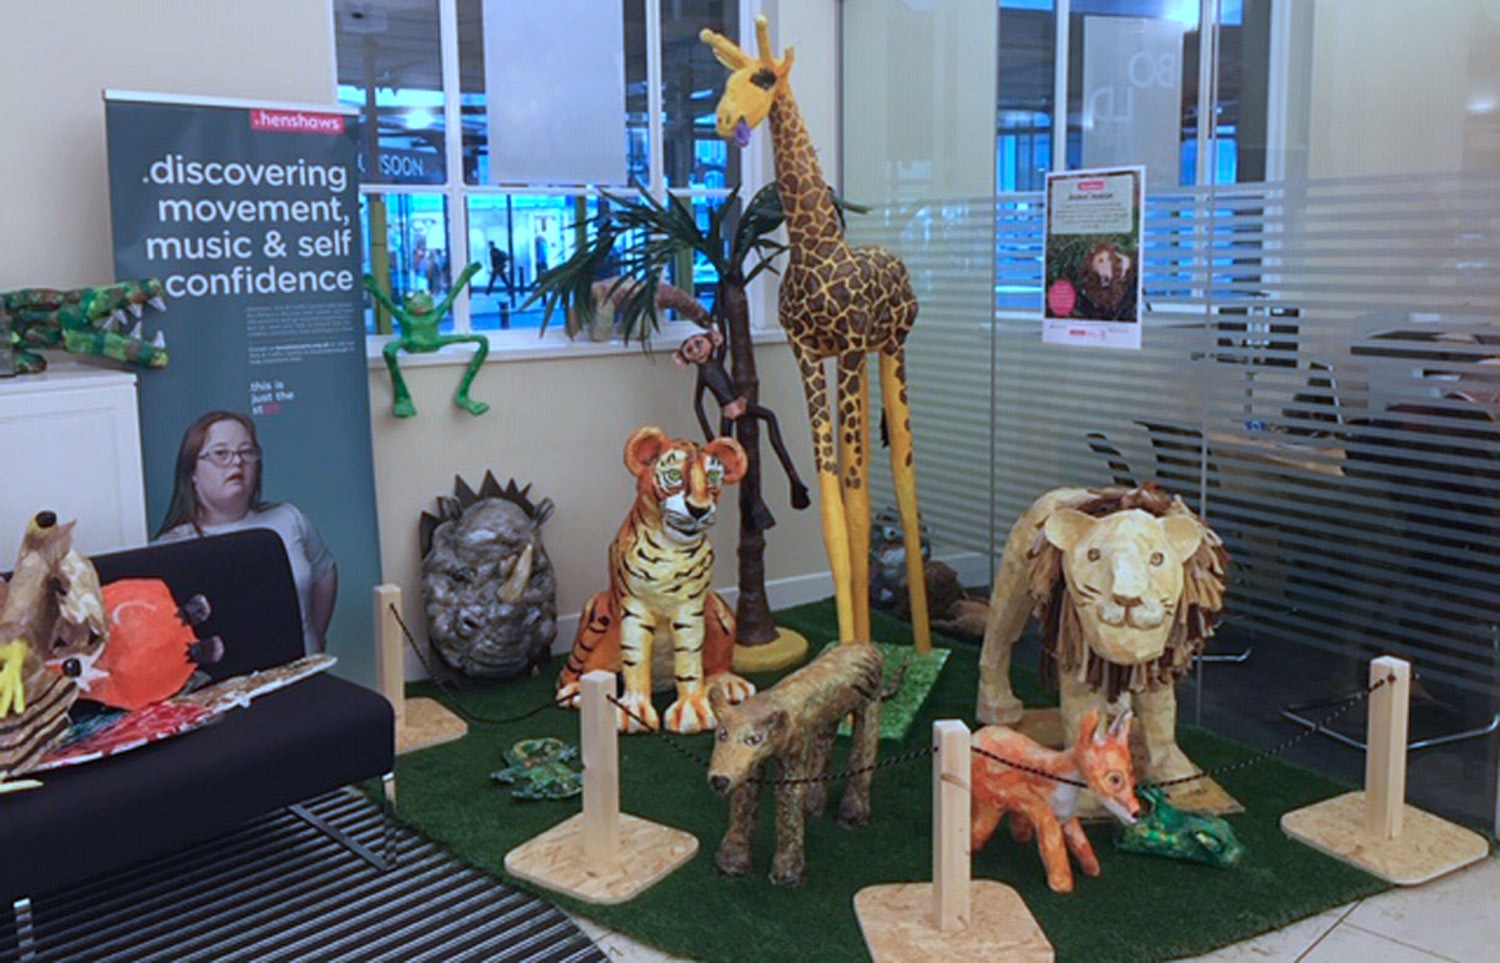 Henshaws Arts & Crafts animals fill the banking hall at Barclays in Harrogate